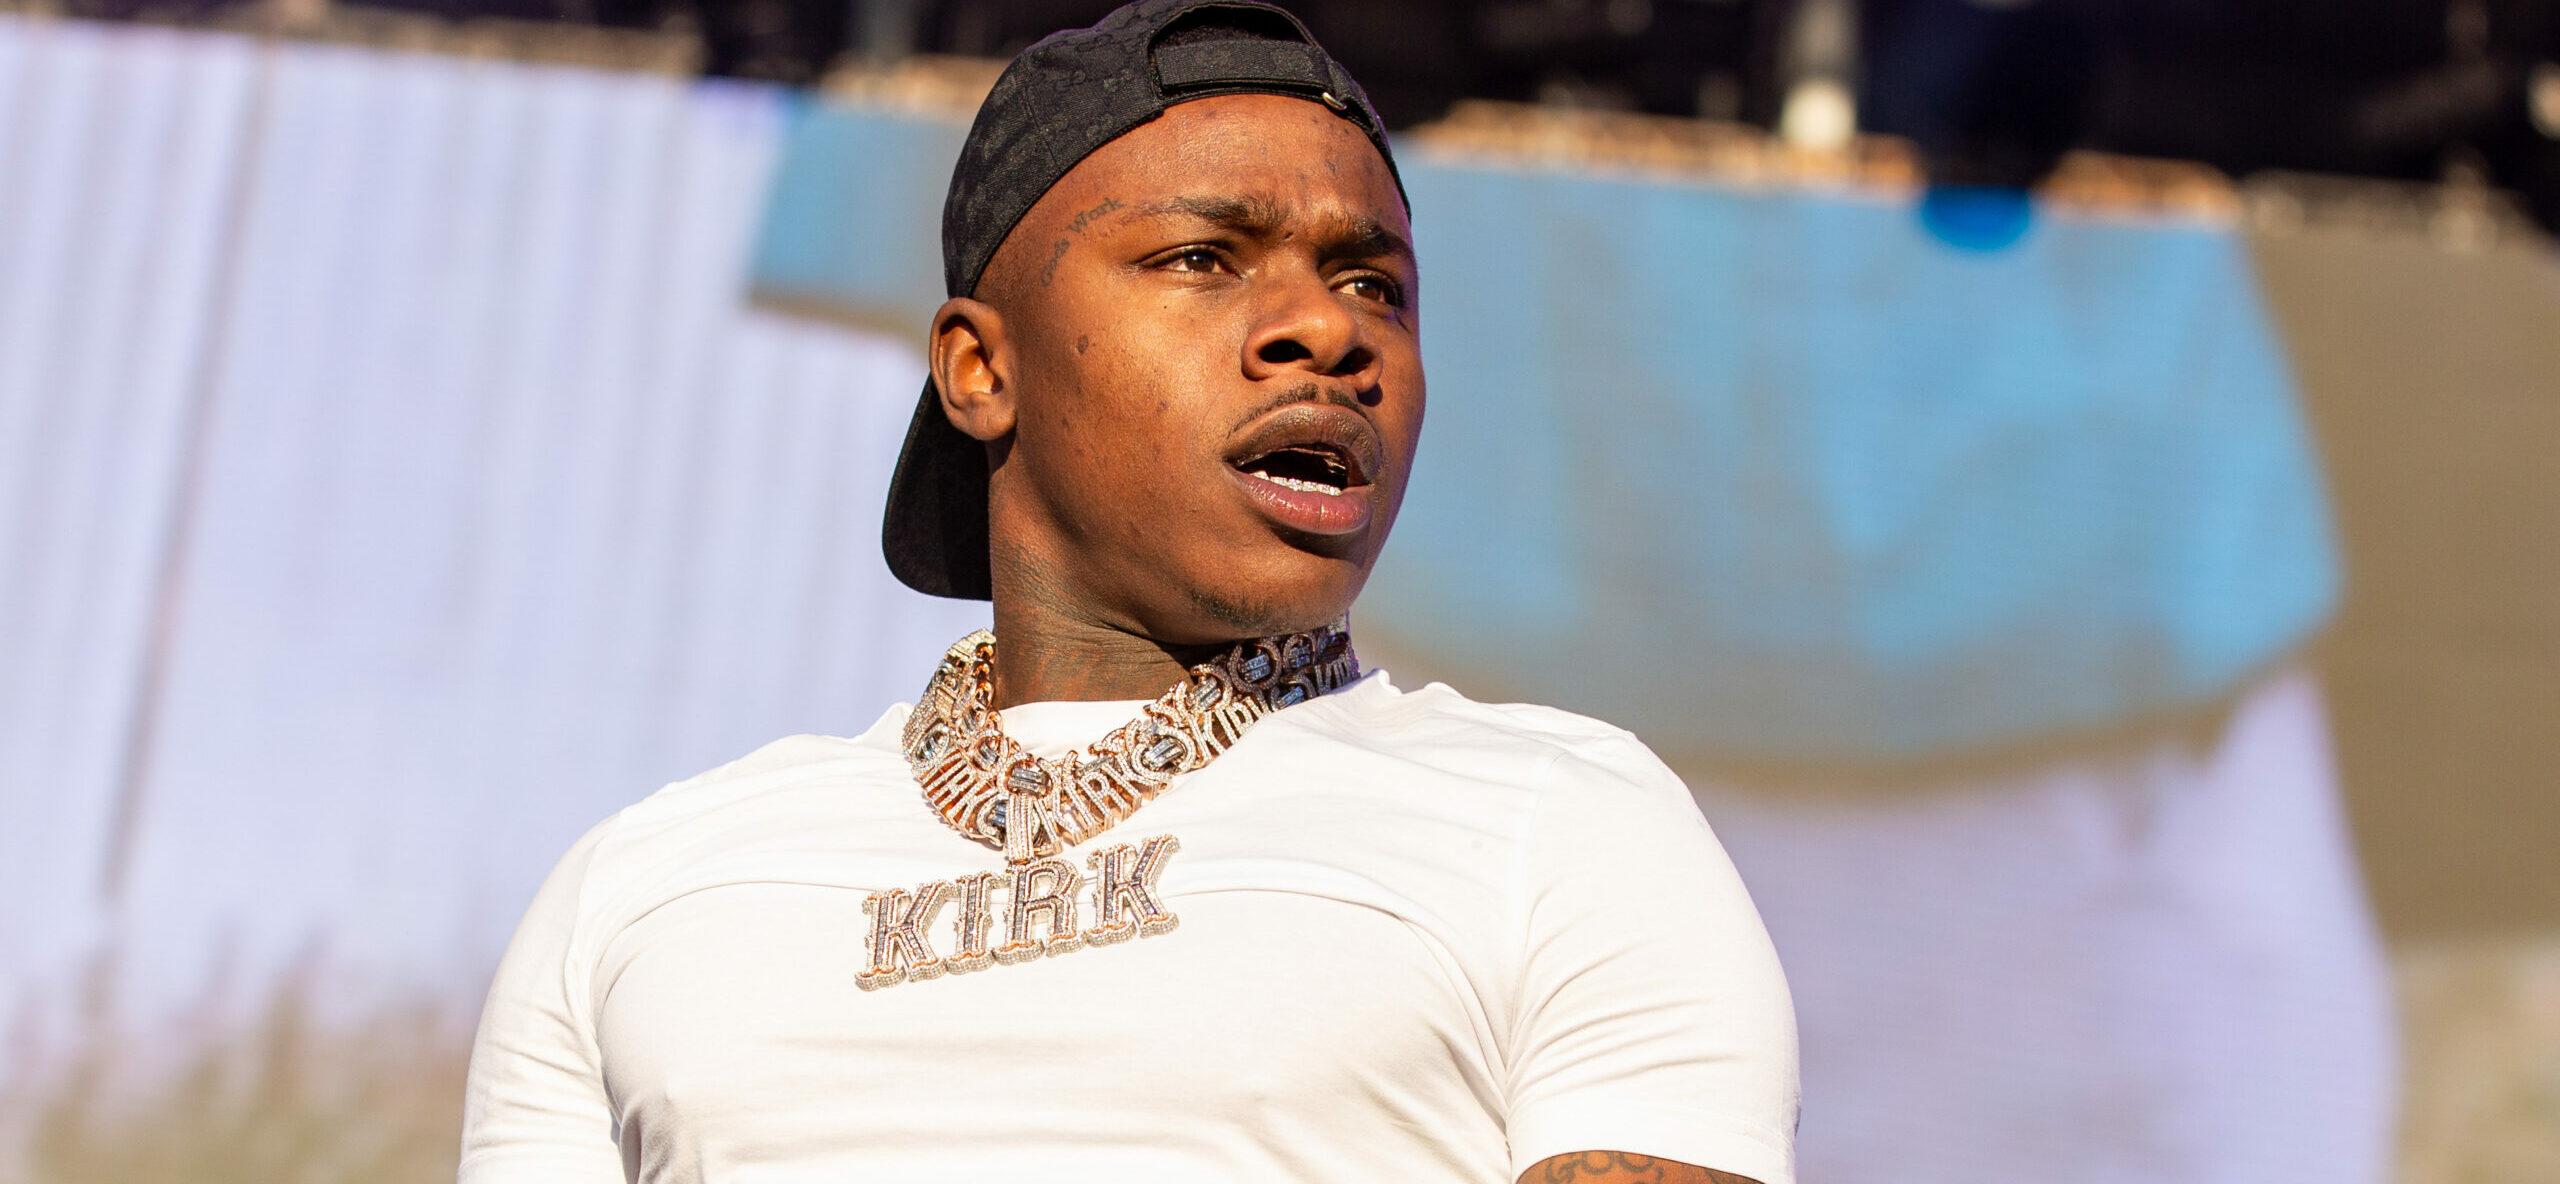 DaBaby’s Baby Mama, DaniLeigh, Charged With Assault Following Domestic Incident